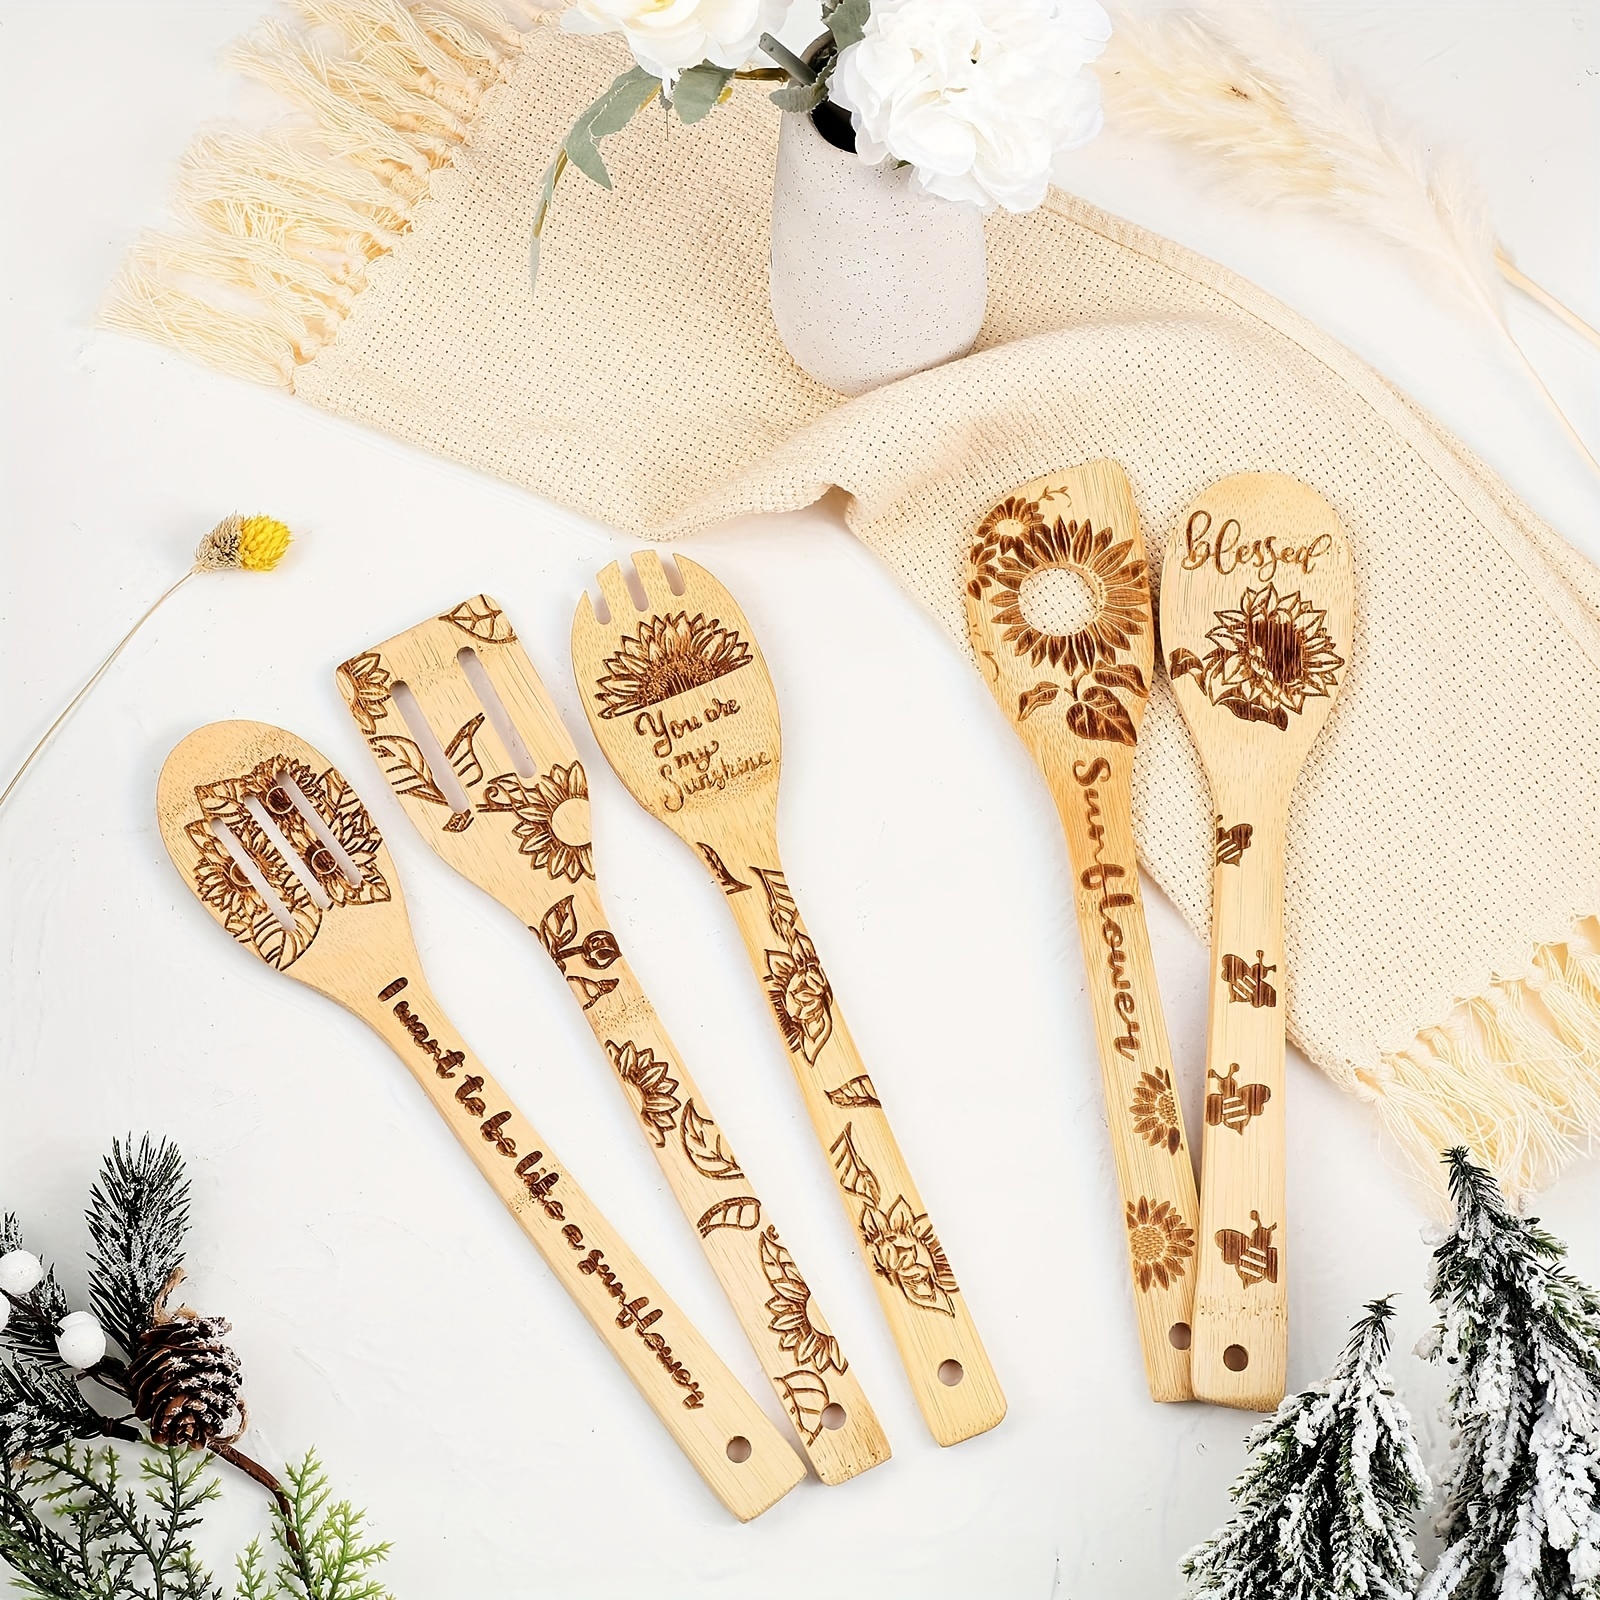 Nightmare Before Christmas Gifts-5 Pcs Wooden Spoons for Cooking Utensils  Set,Nightmare Before Christmas Halloween Decorations,Wood Kitchen Utensils  set for Halloween Gifts Nightmare spoons 